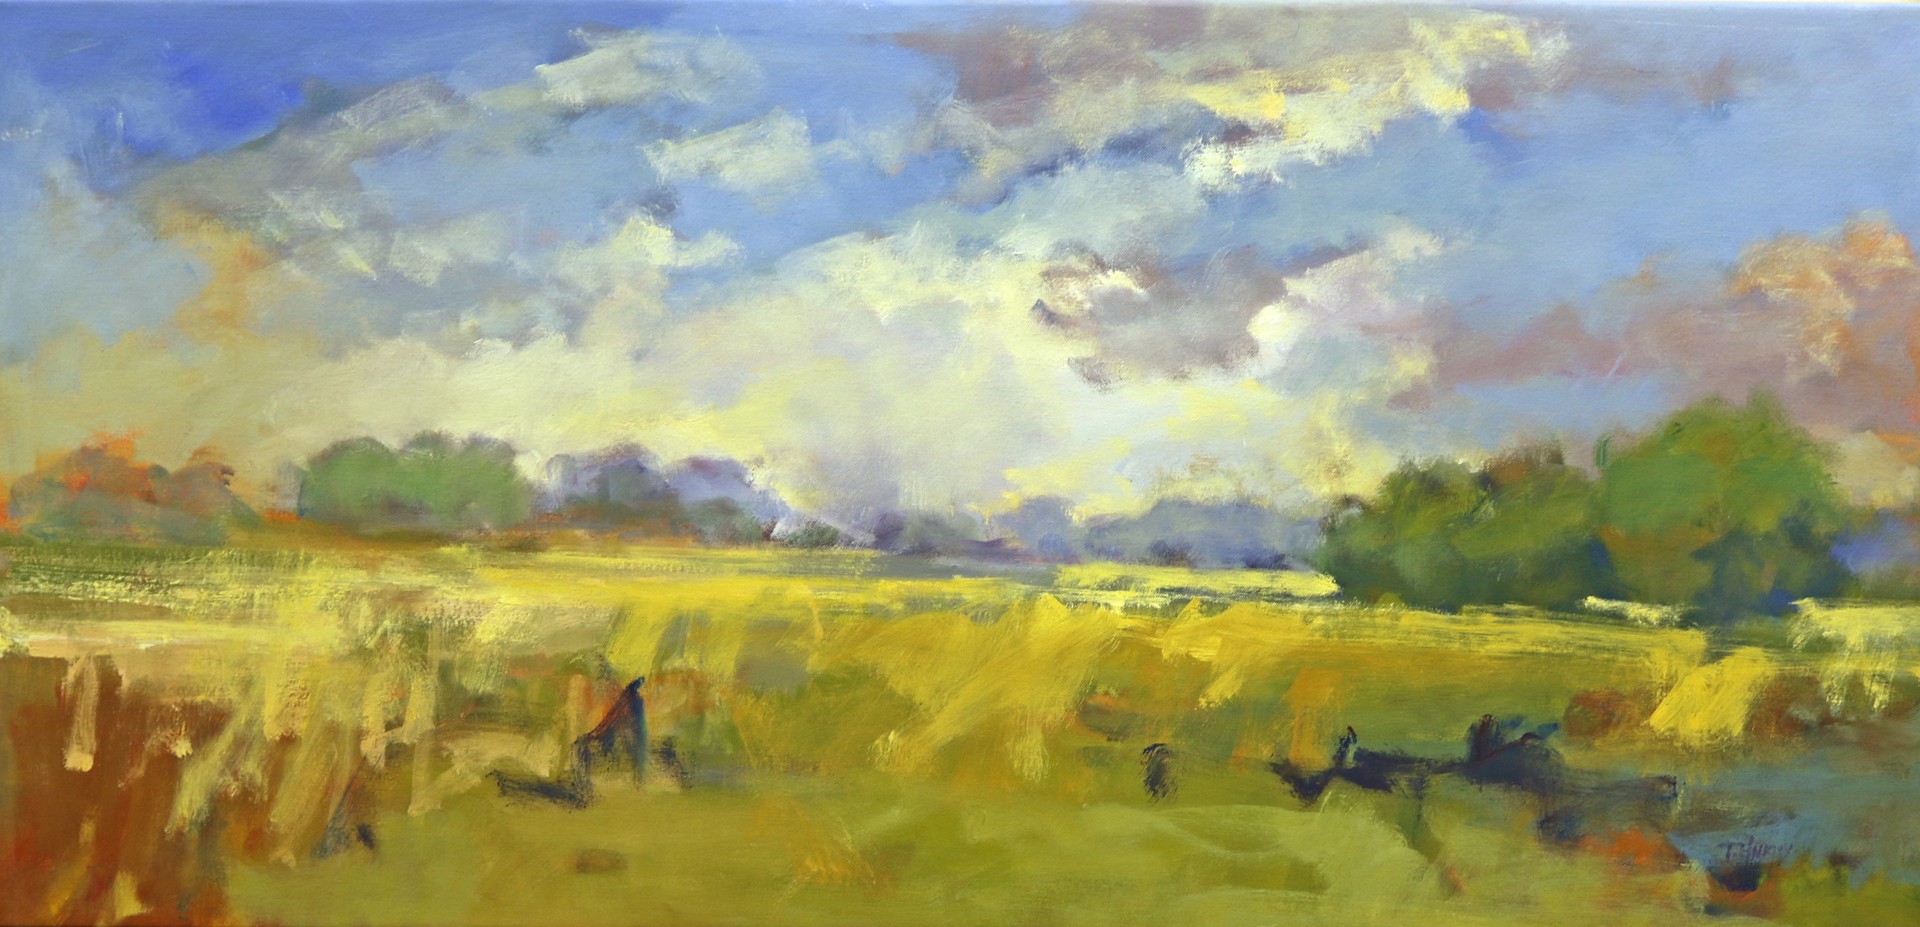 Fields of Yellow Grass by Trish Hurley